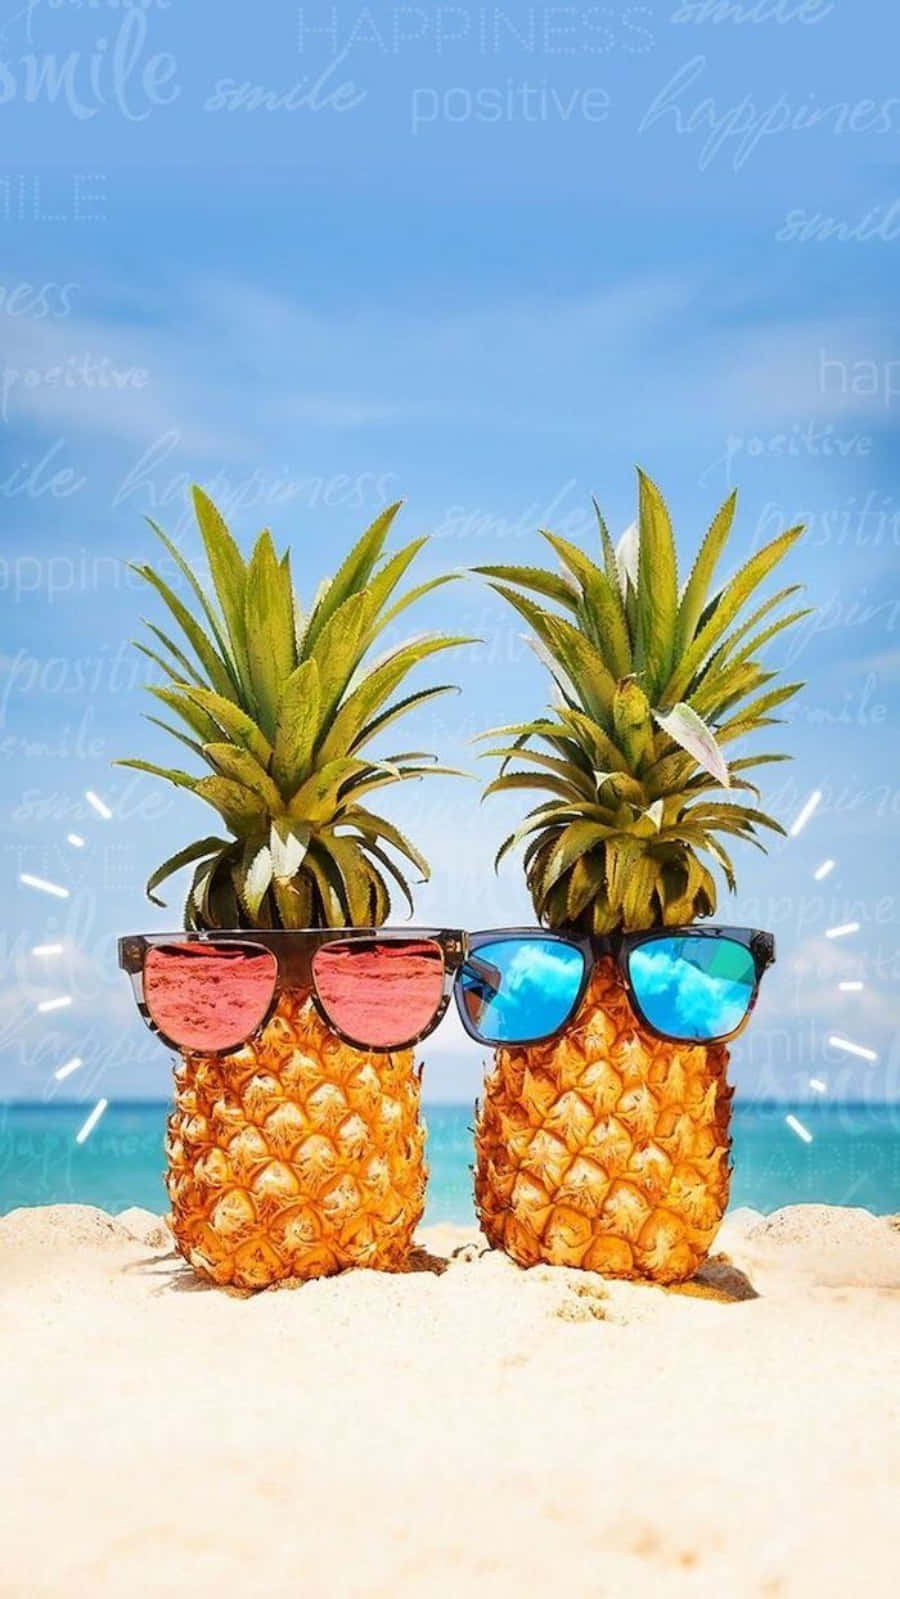 Two Pineapples Wearing Sunglasses On The Beach Background